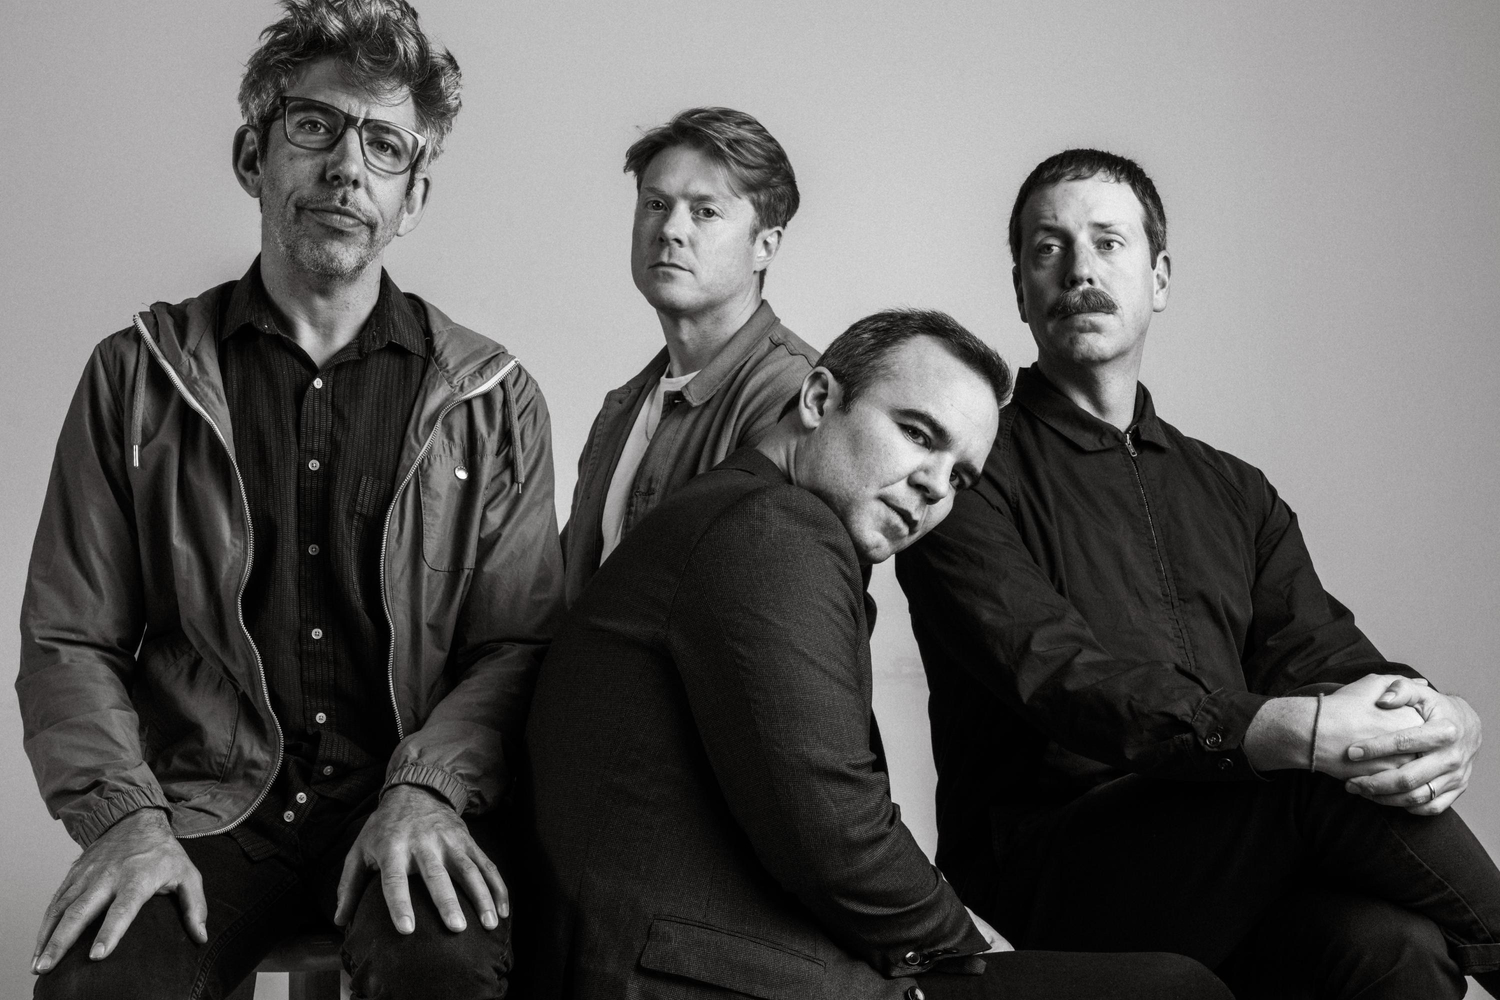 Future Islands offer up new track ‘Deep In The Night’